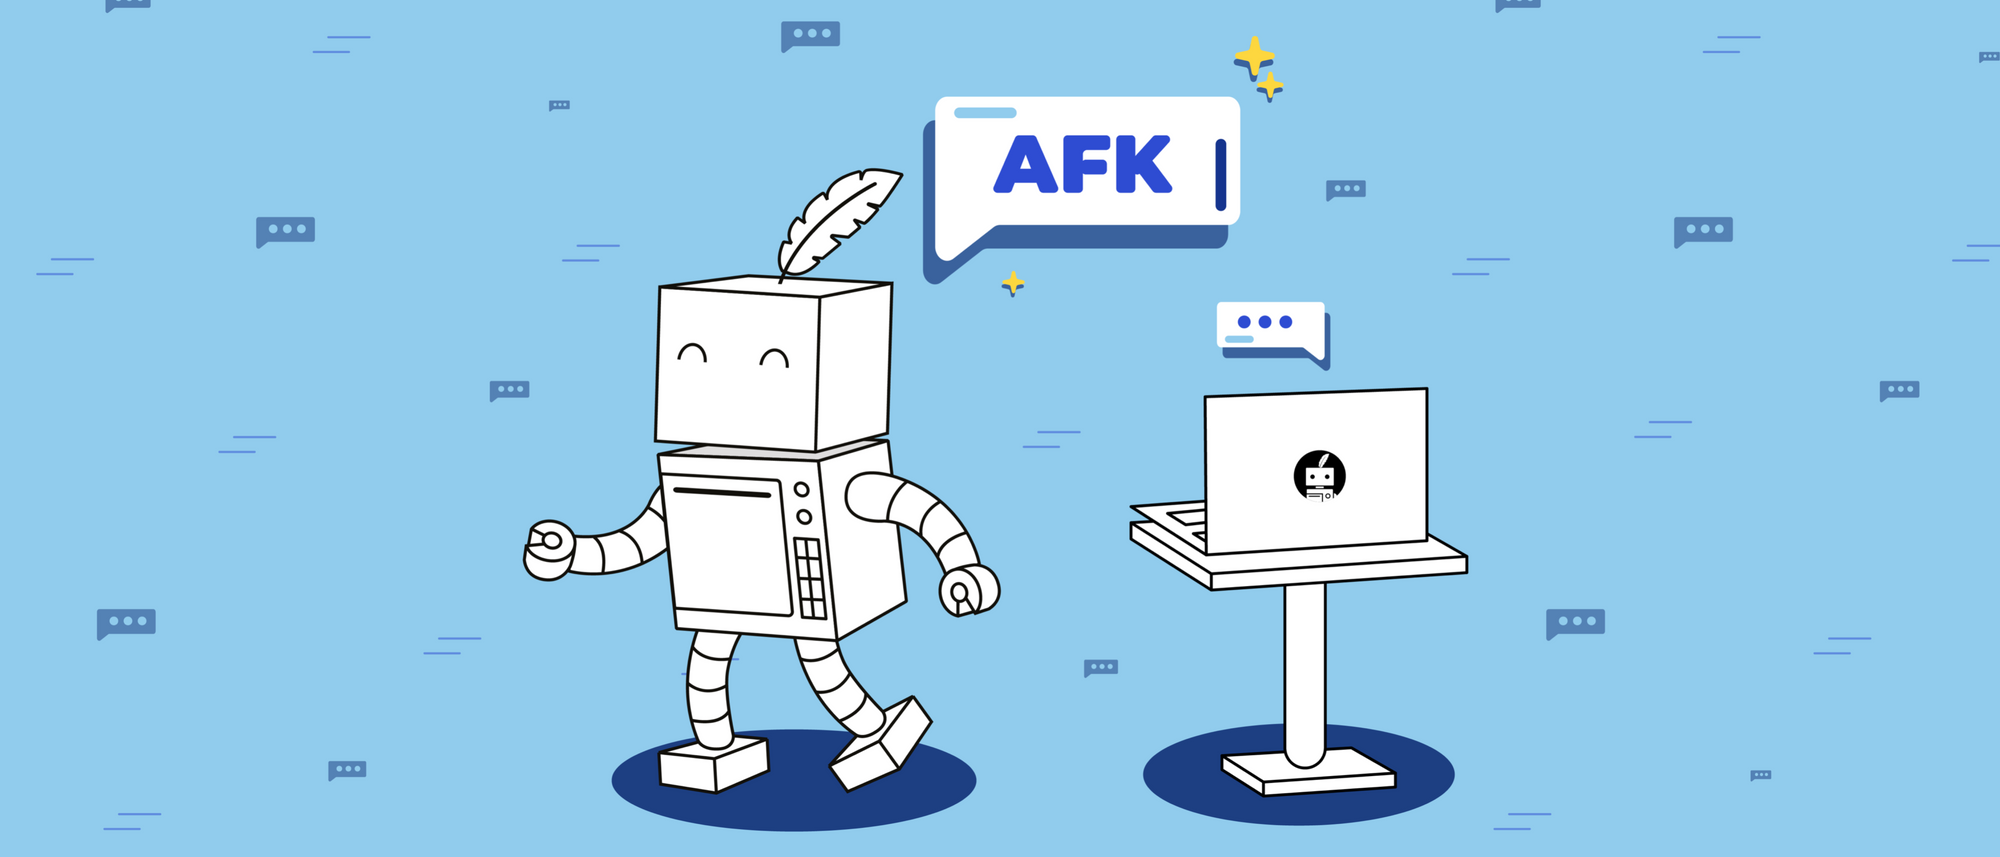 What is the meaning of AFK?